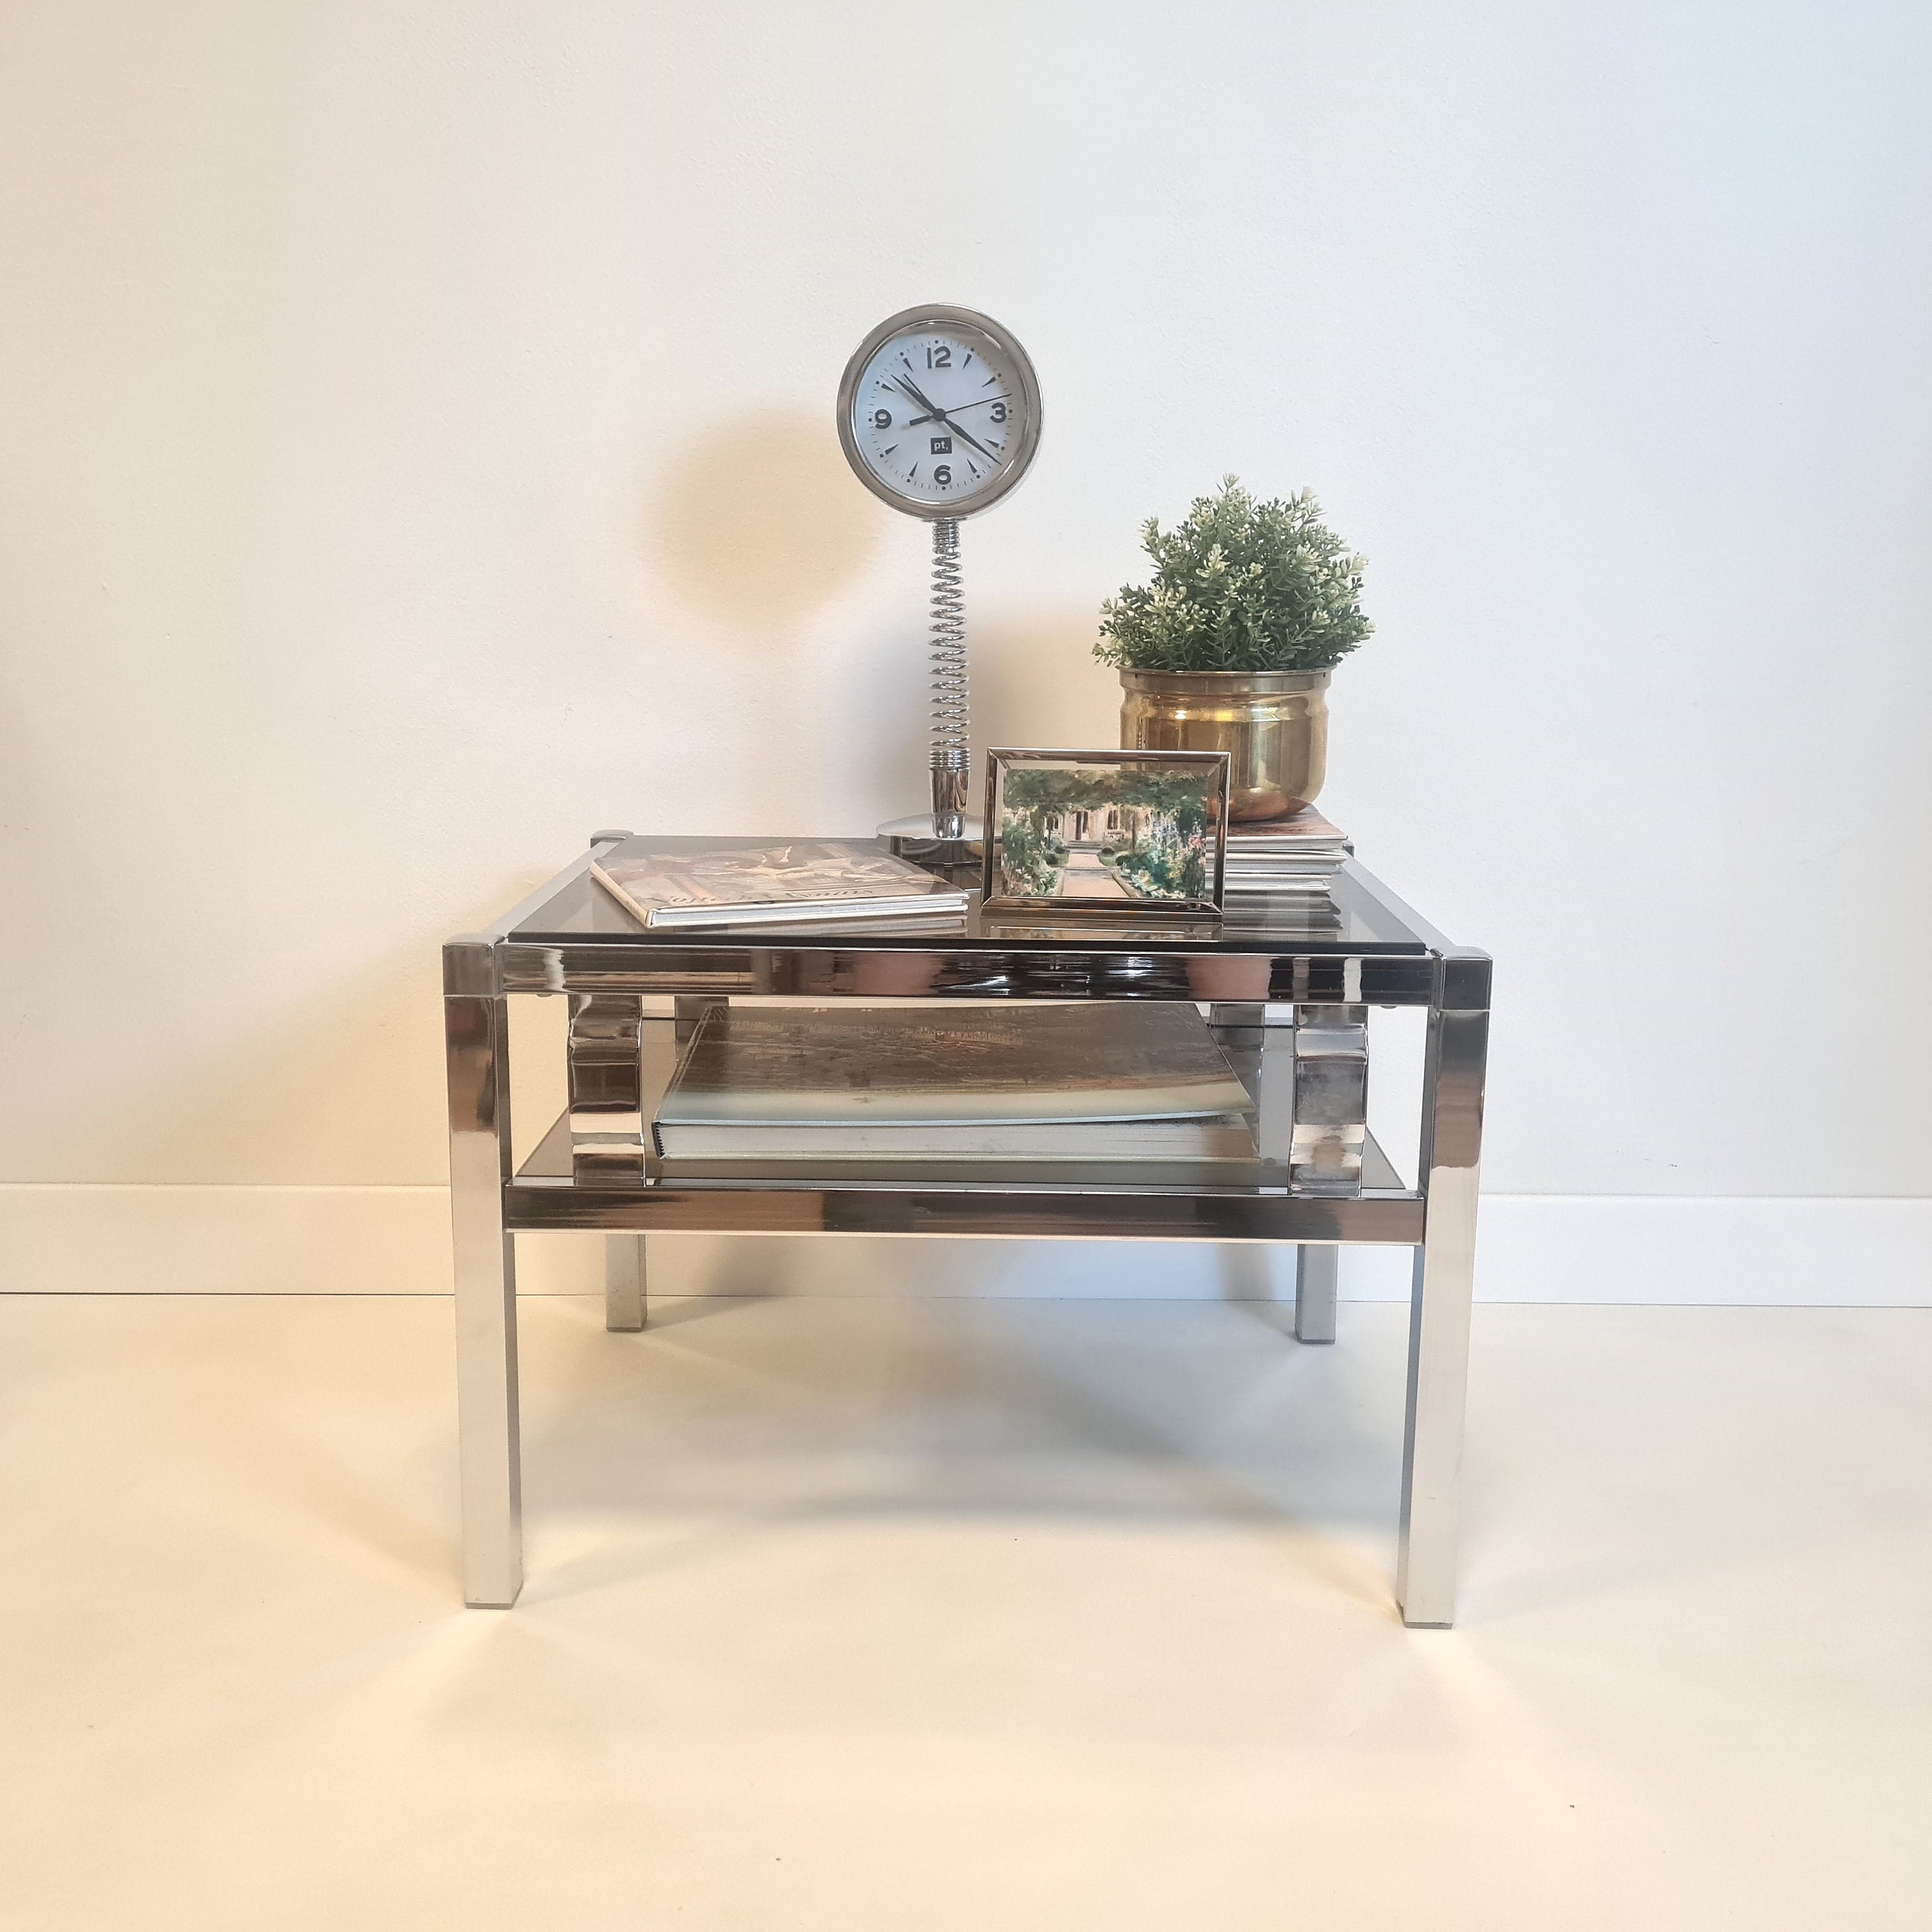 Neiman Marcus Chrome Display Table Intricacy – Fixtures Close Up